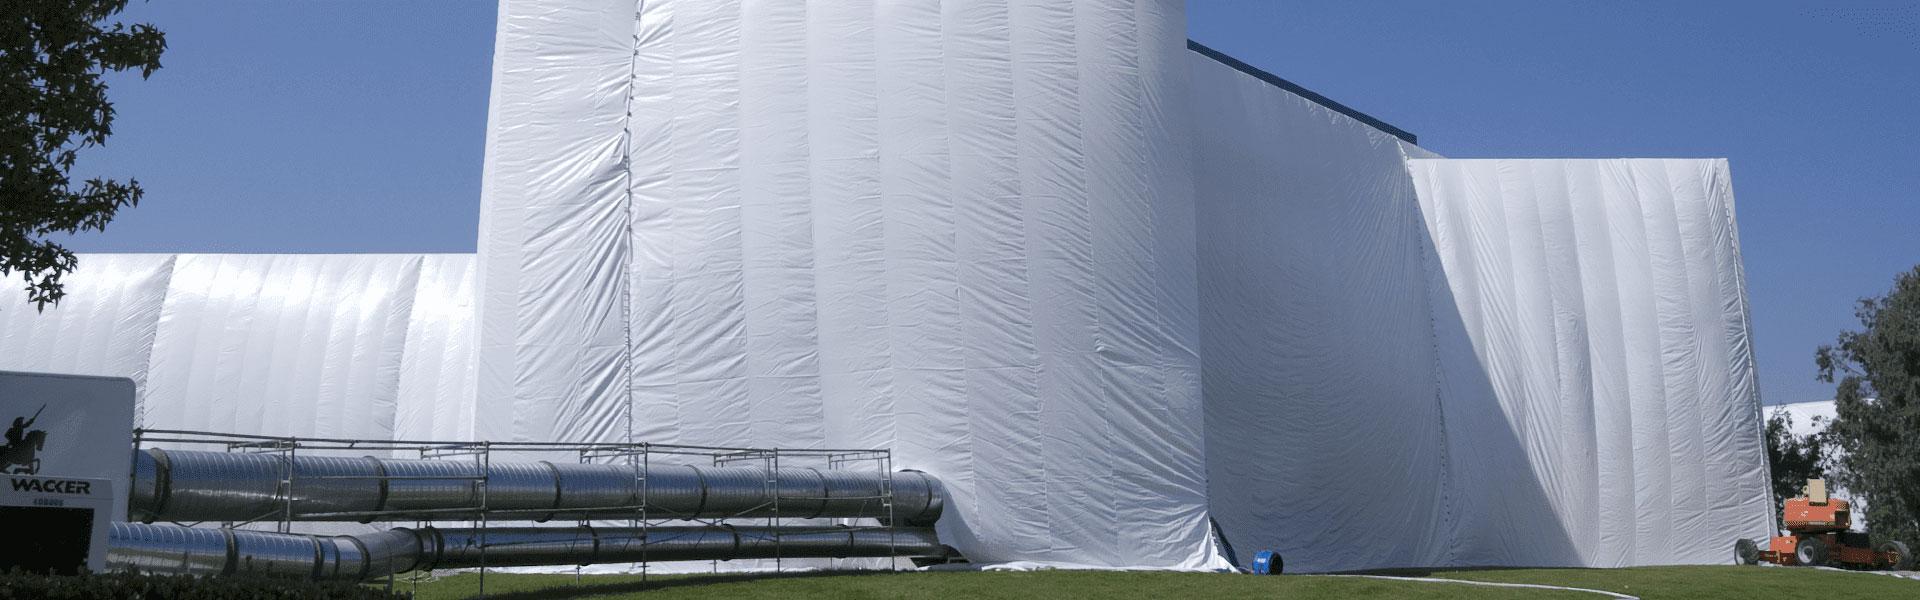 commercial facility tented for fumigation service